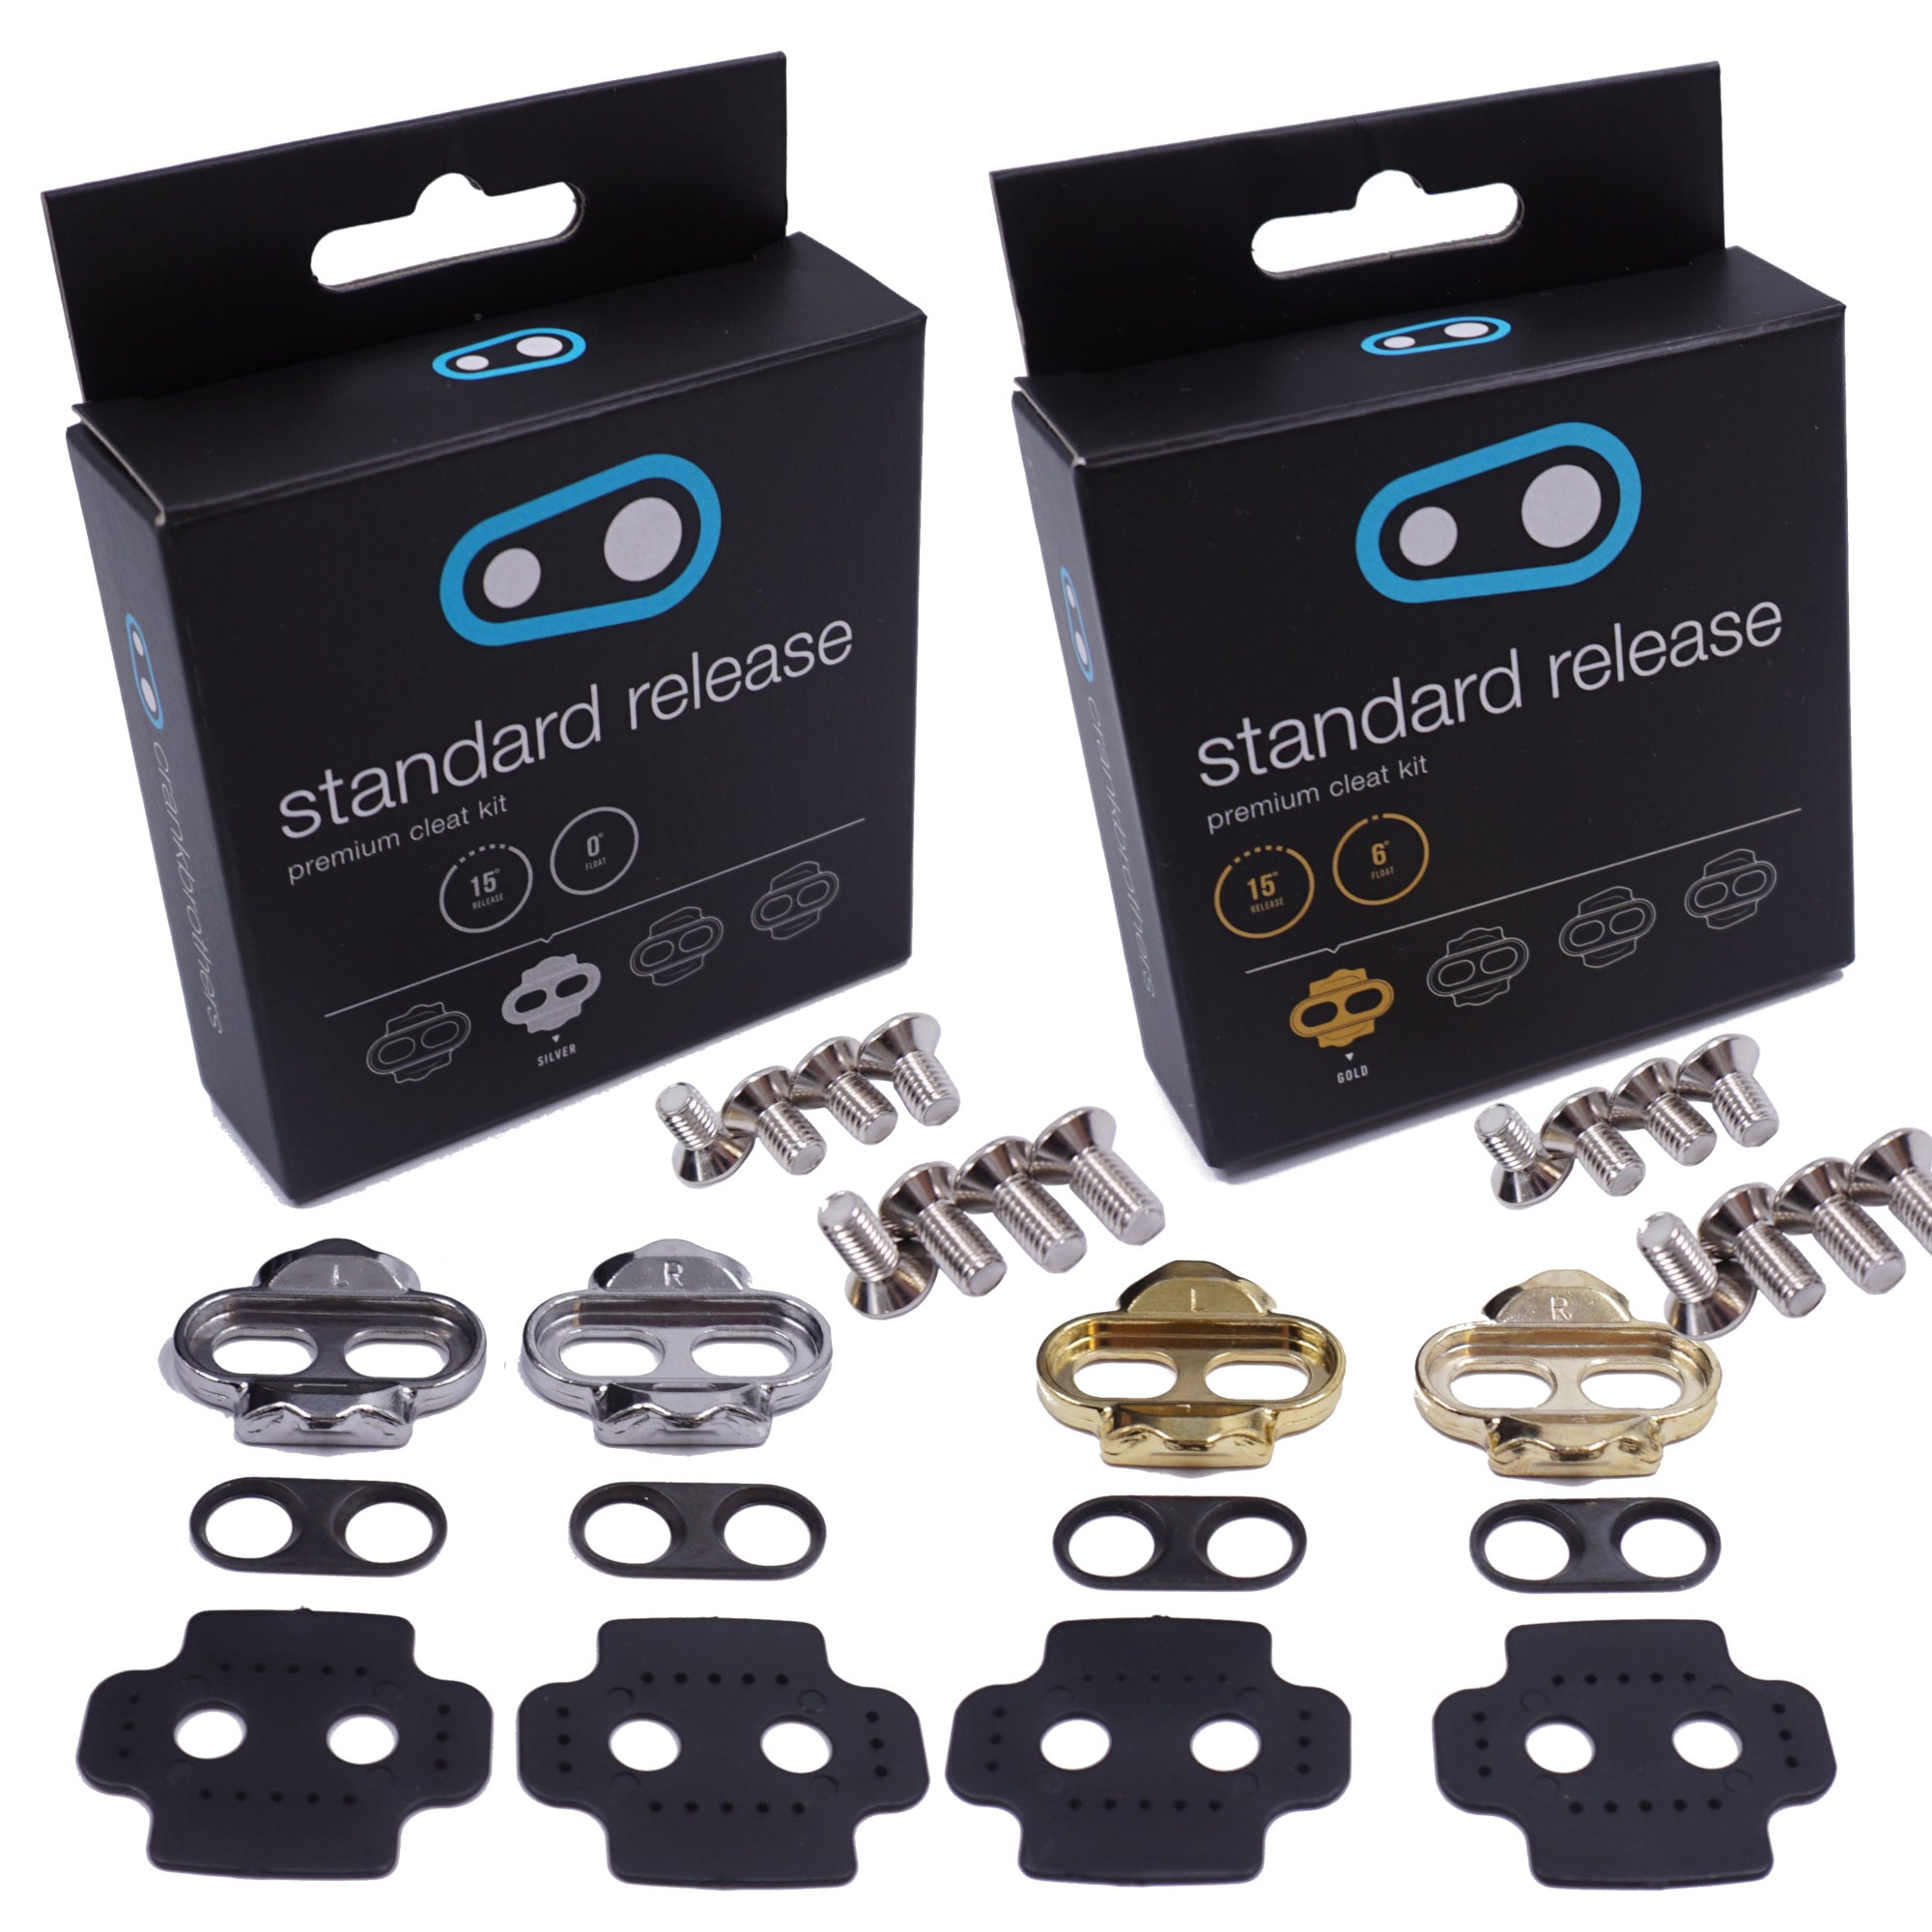 Crank Brothers Standard Release Premium Cleat Kit - The Bikesmiths